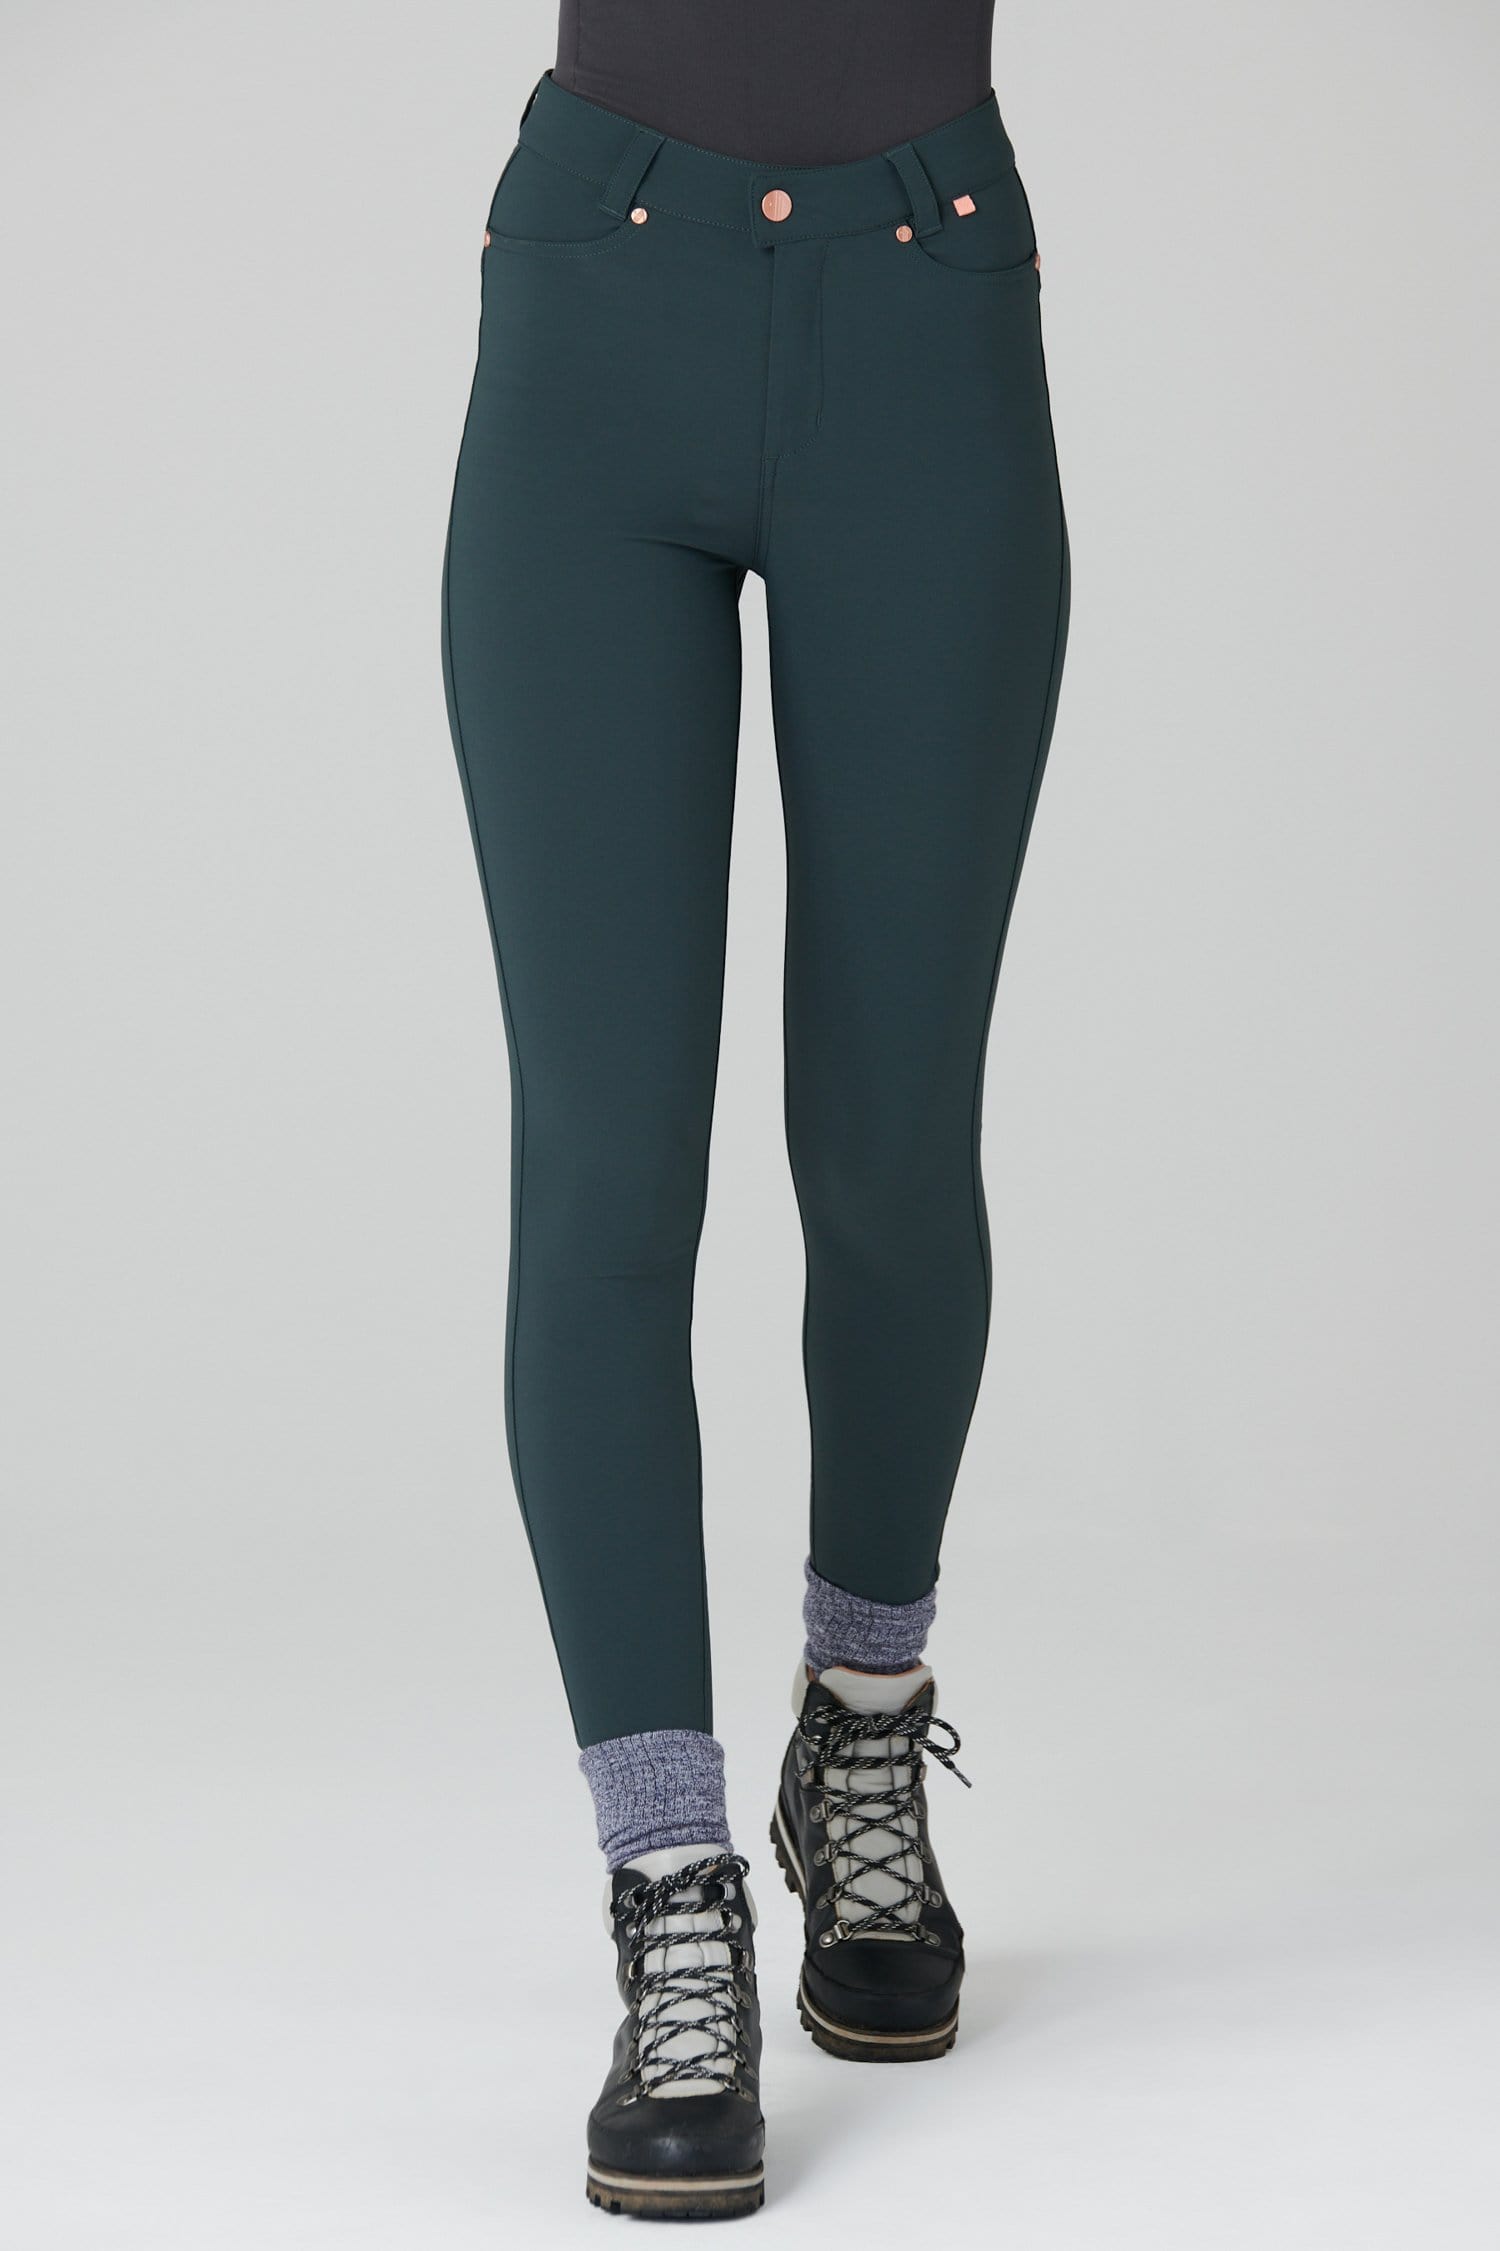 Max Stretch Skinny Outdoor Trousers - Forest Green - 32l / Uk14 - Womens - Acai Outdoorwear